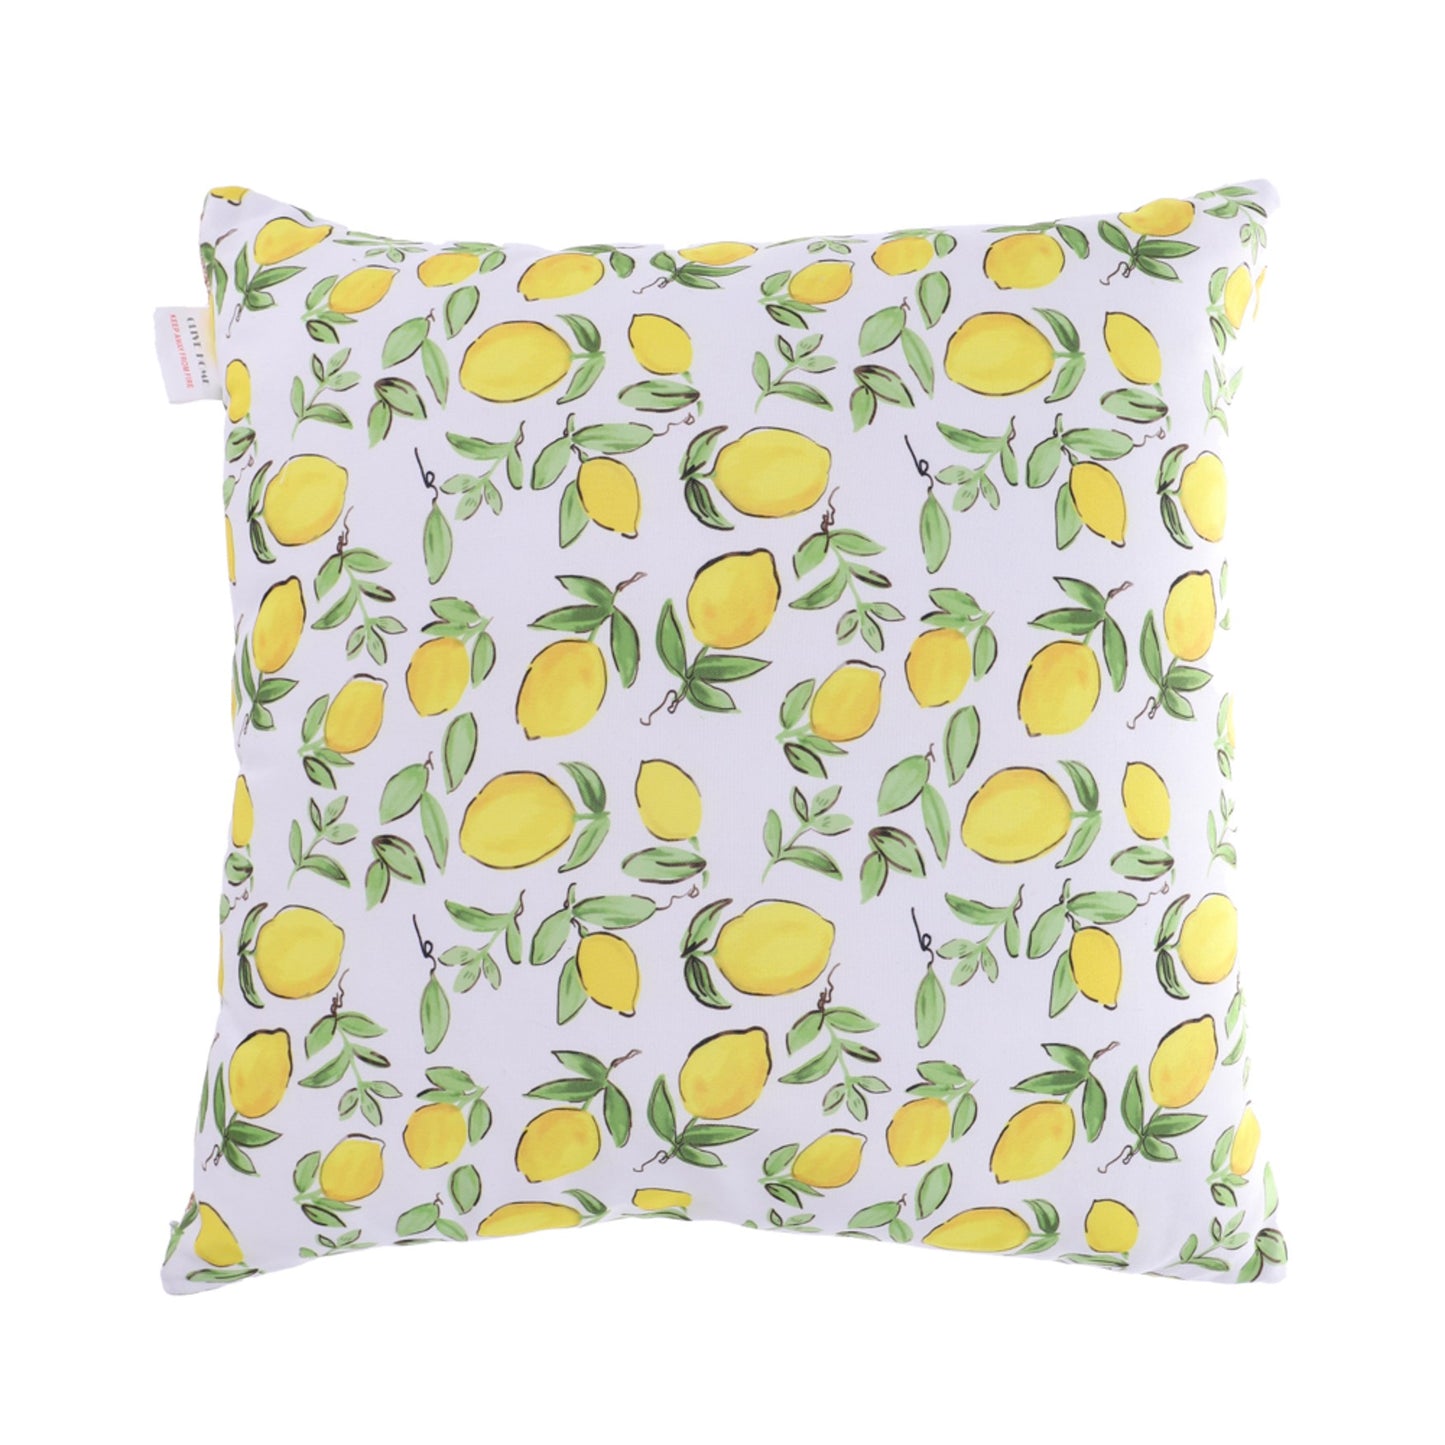 HONEY Lemon Throw Pillow Cover Fruits and Leaves Floral Linen Fabric for Couch Bed Sofa Car Waist Cushion